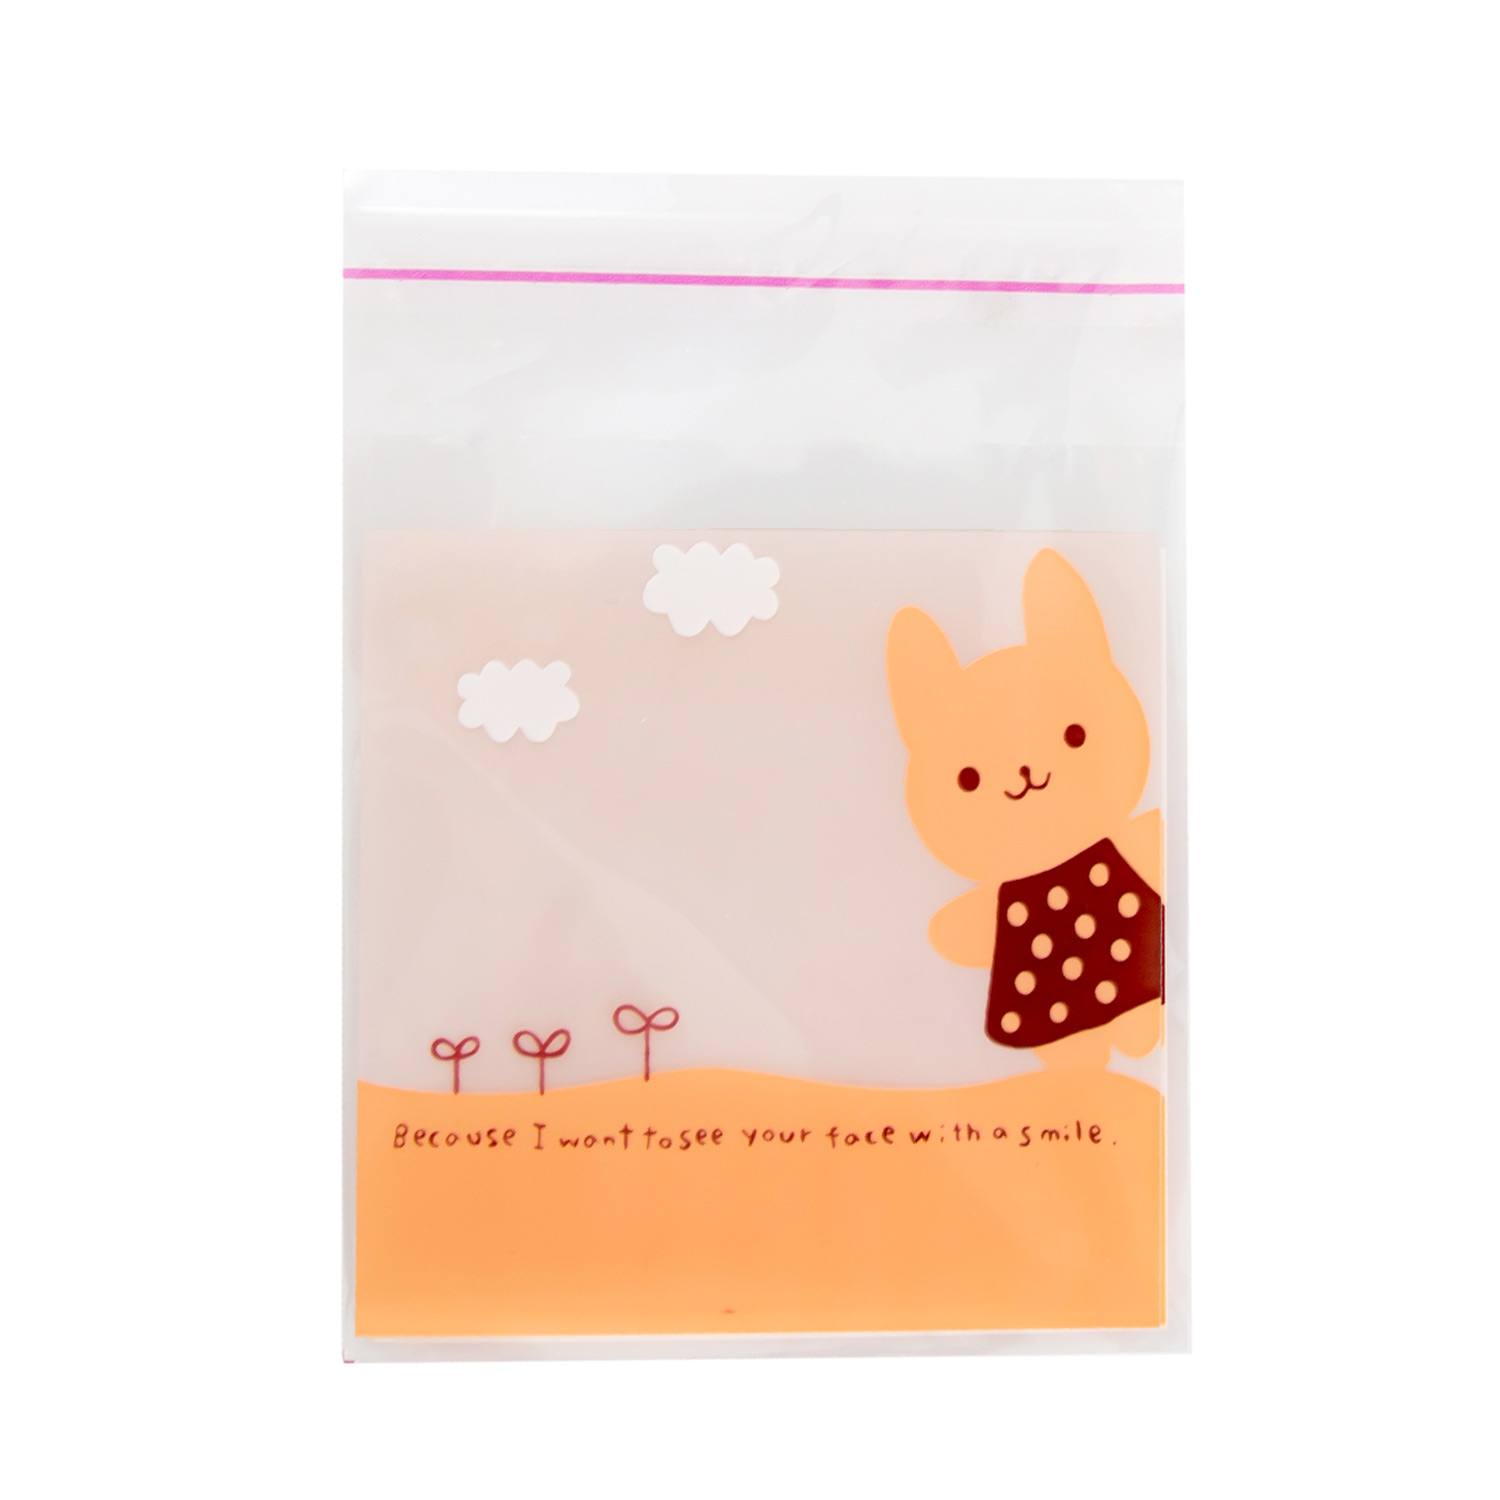 Plastic Bag for Sweets